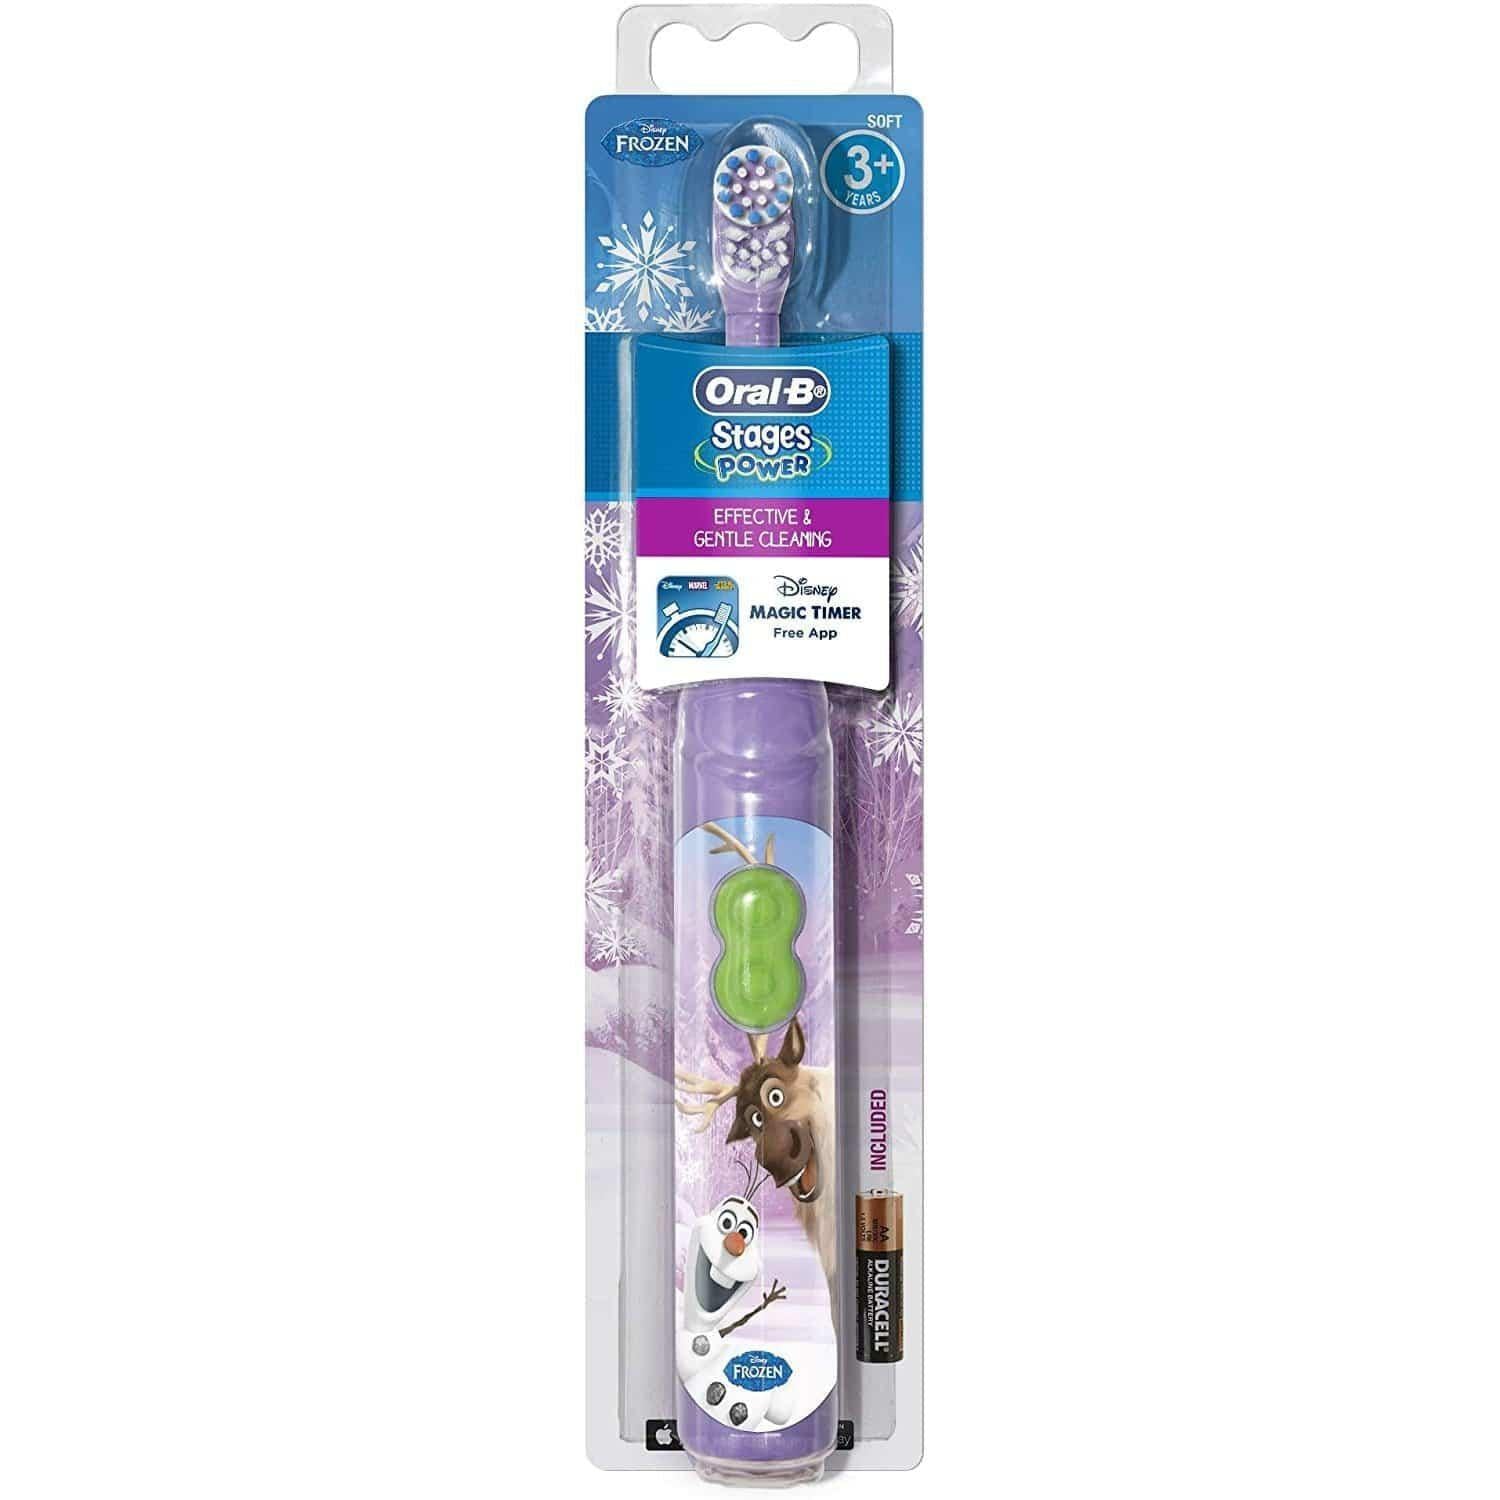 Oral-B Stages Power Kid's Electric Toothbrush - Extra Soft Bristles - Frozen - Healthxpress.ie